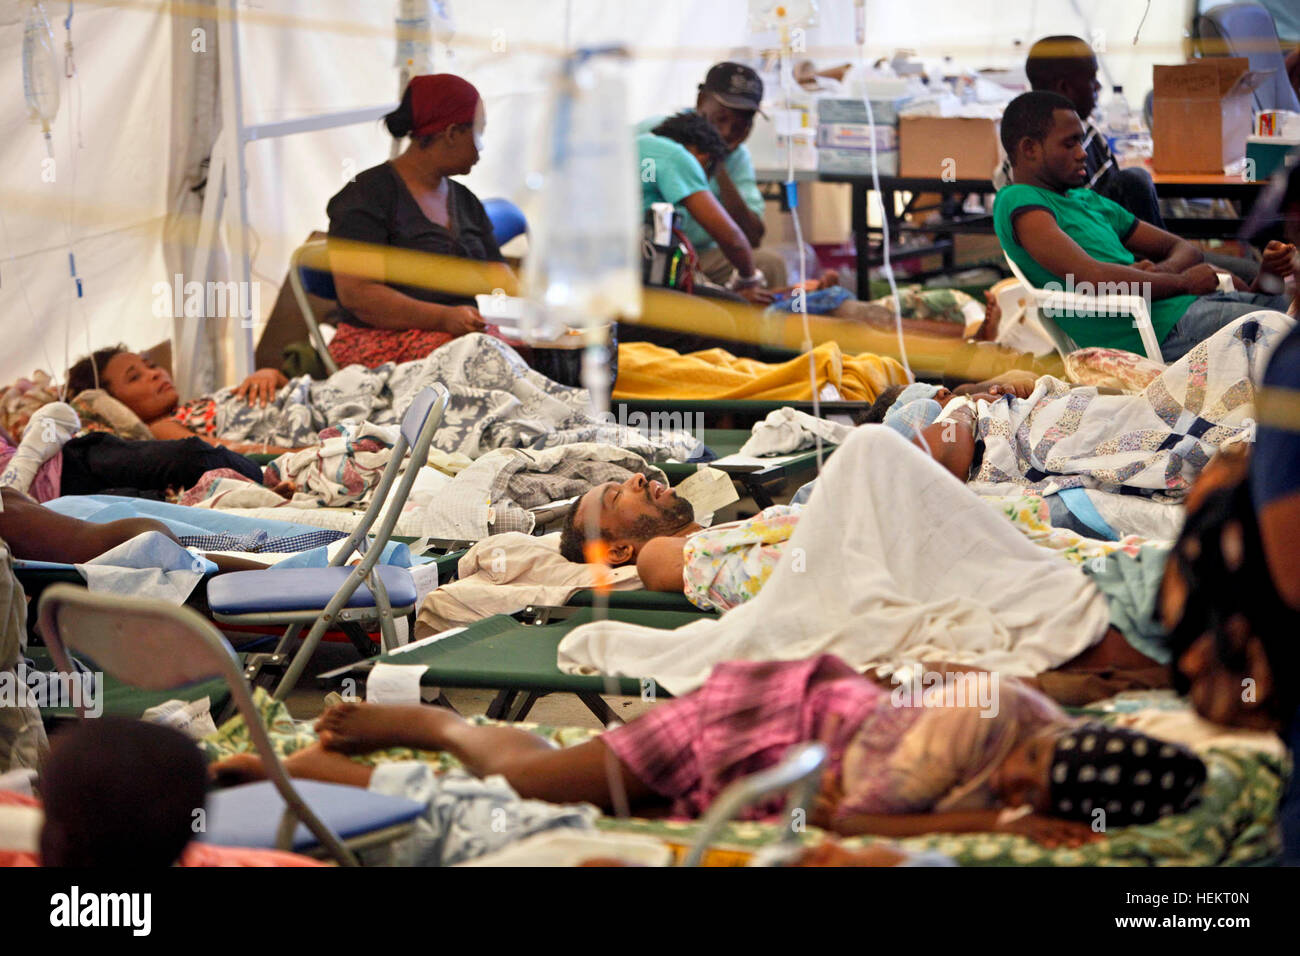 December 23, 2016 - Port-Au-Prince, Florida, U.S. - 011710 (Lannis Waters/The Palm Beach Post) PORT-AU-PRINCE, HAITI - Patients and their families in the Project Medishare Triage Center at the United Nations compound at the airport. Dr. Dan Kairys (cq), a surgeon at Lakeside Medical Center in Belle Glade, and his wife Junia Kairys (cq), a physician's assistant, worked at the center. (Credit Image: © Lannis Waters/The Palm Beach Post via ZUMA Wire) Stock Photo